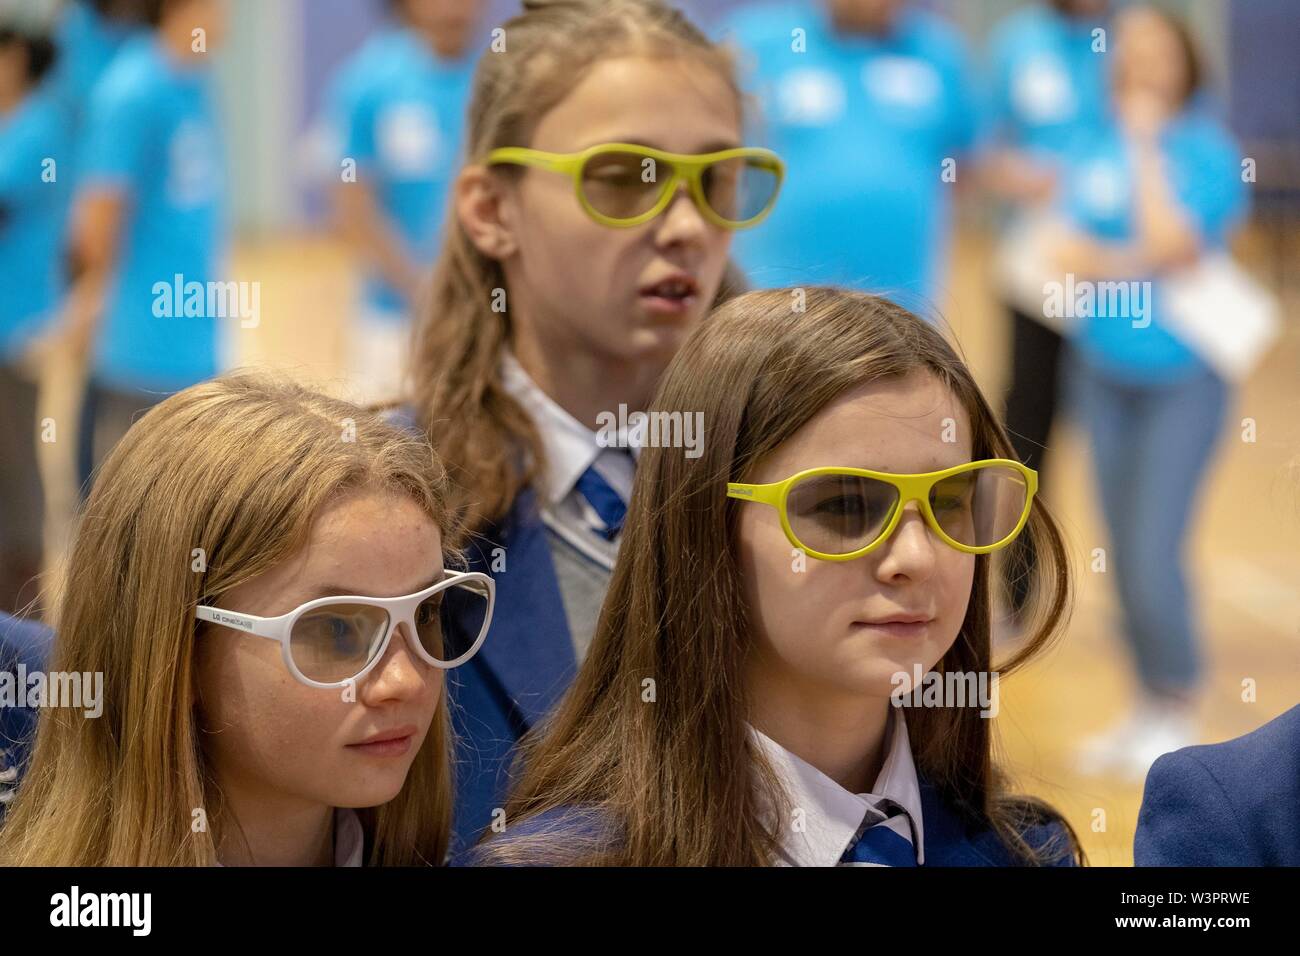 Children participating in Science Stock Photo